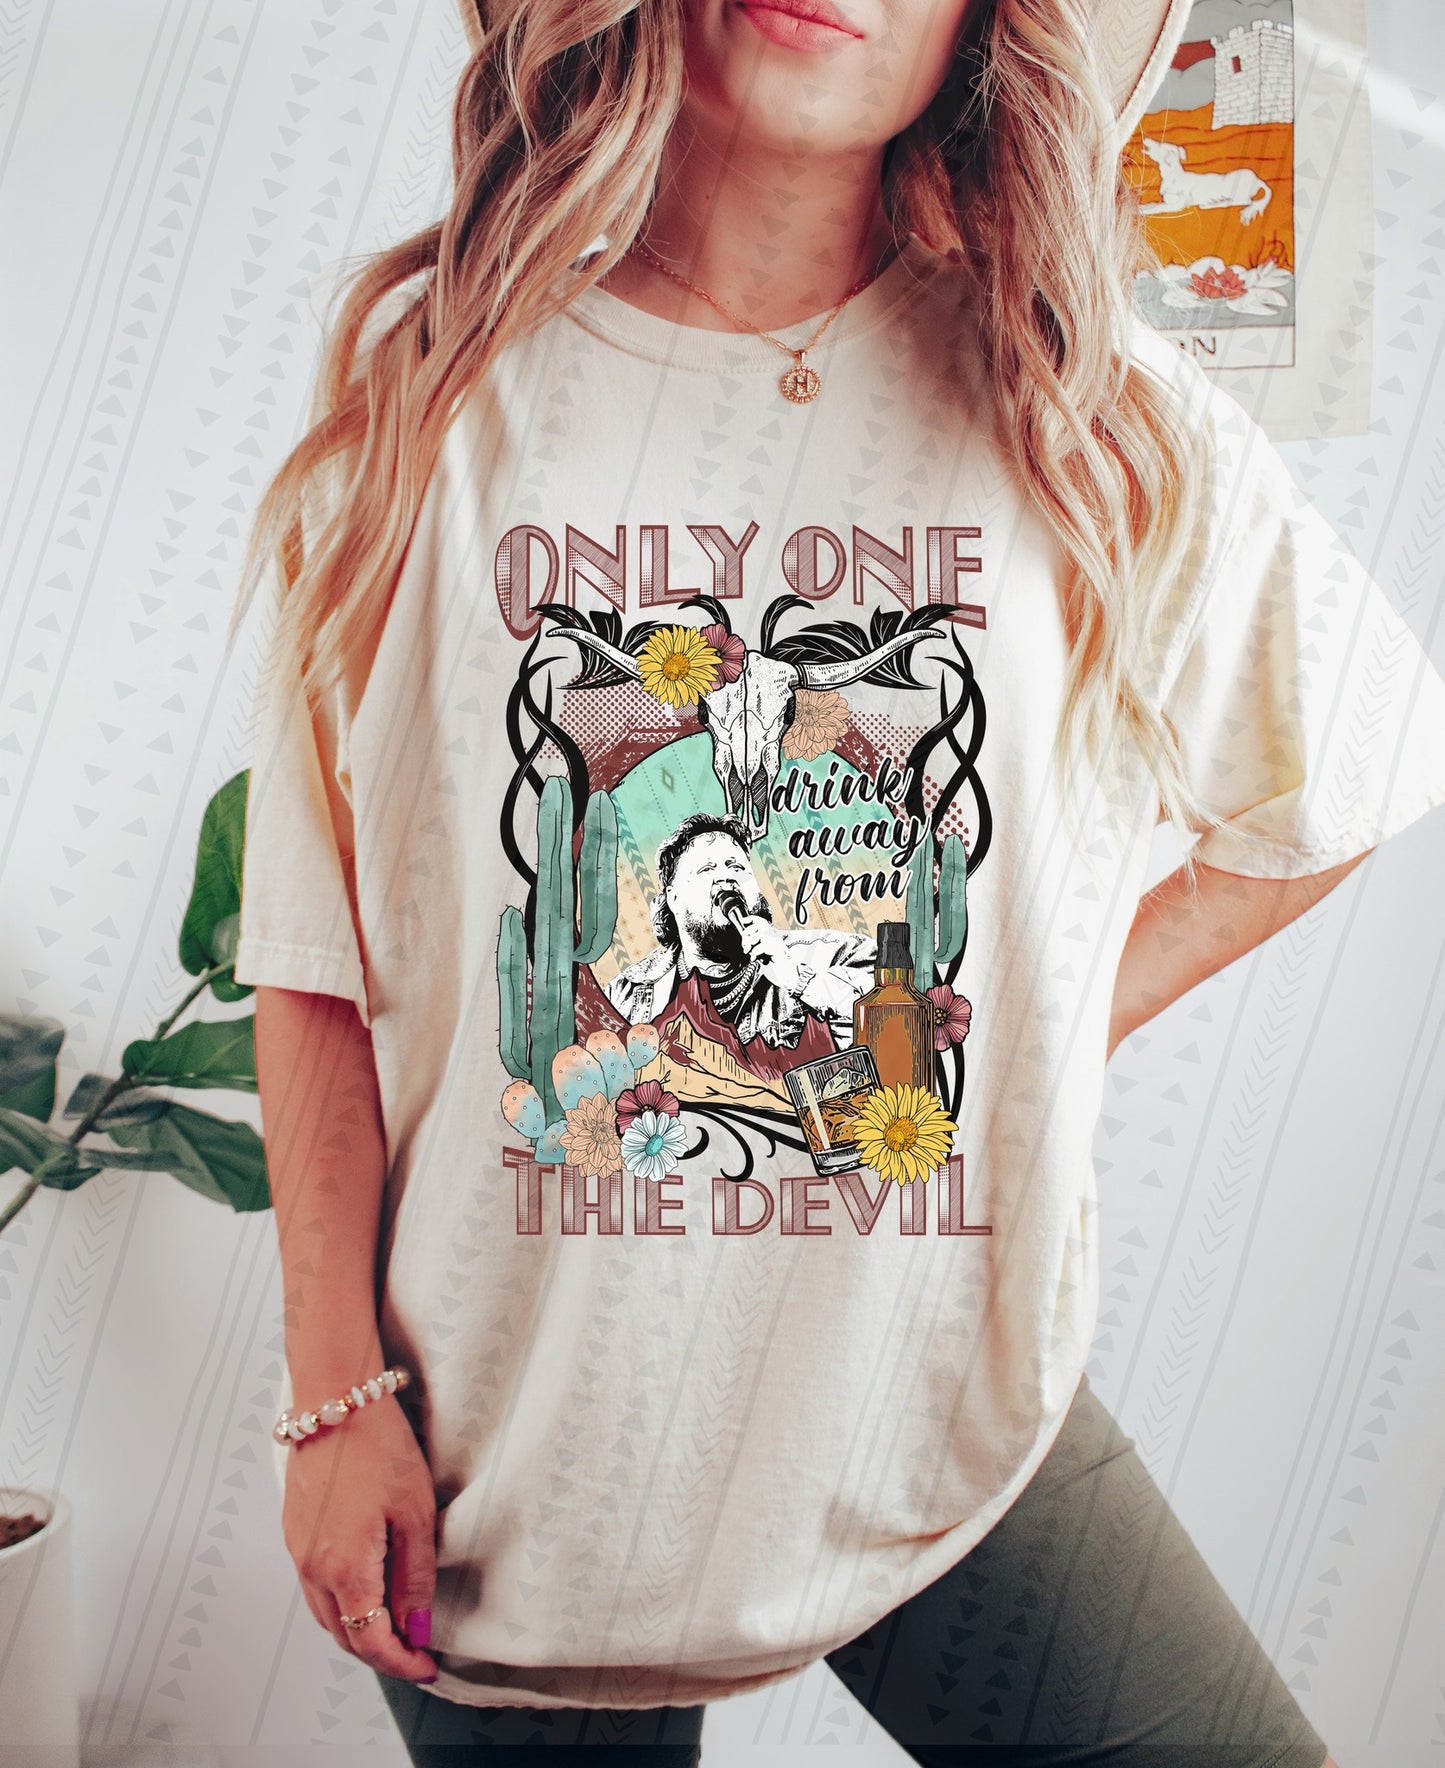 One Drink Away From The Devil- designer Three girls grace